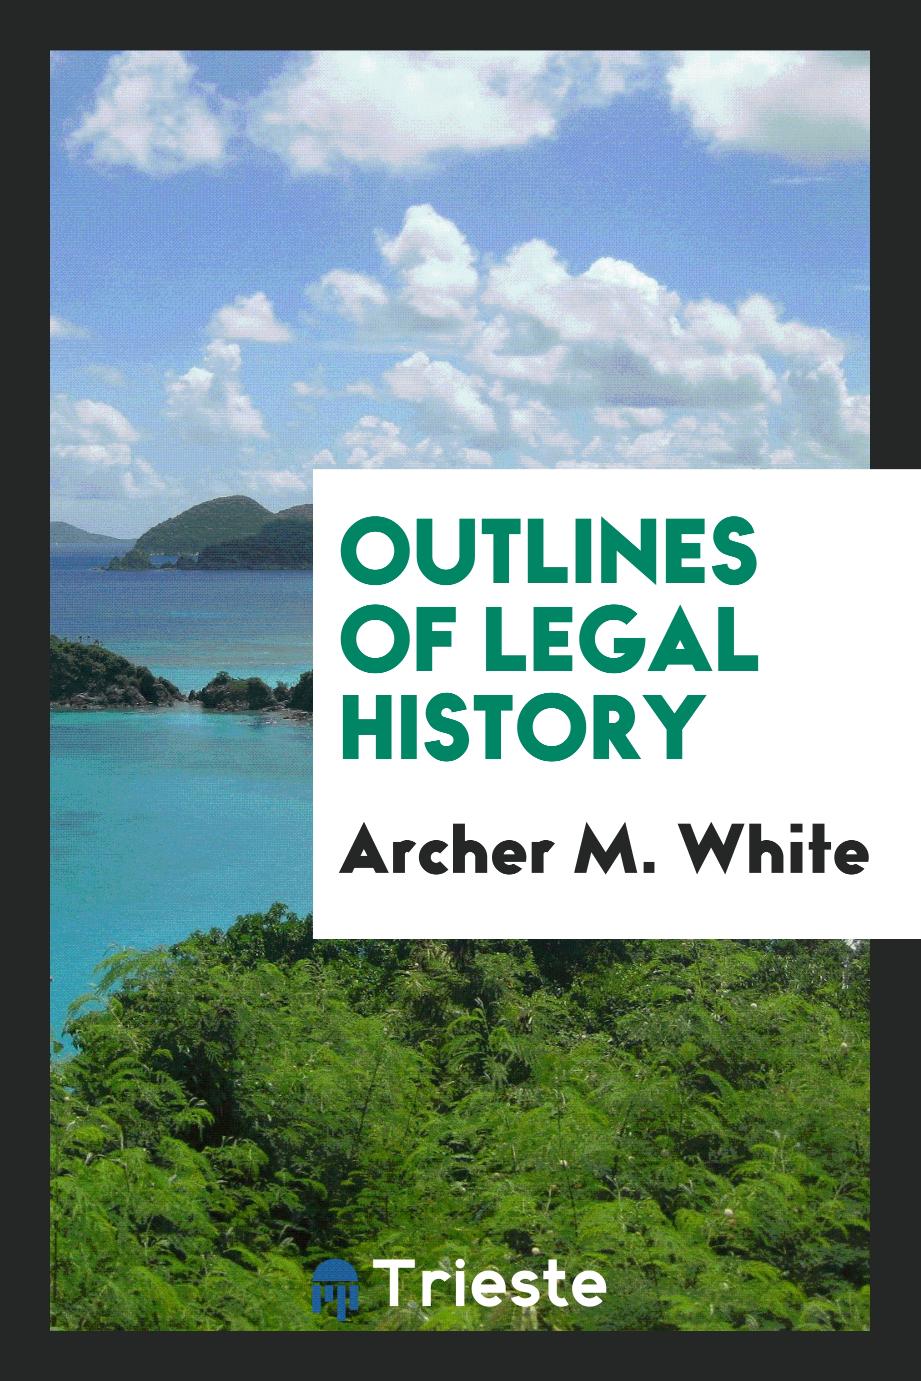 Outlines of legal history